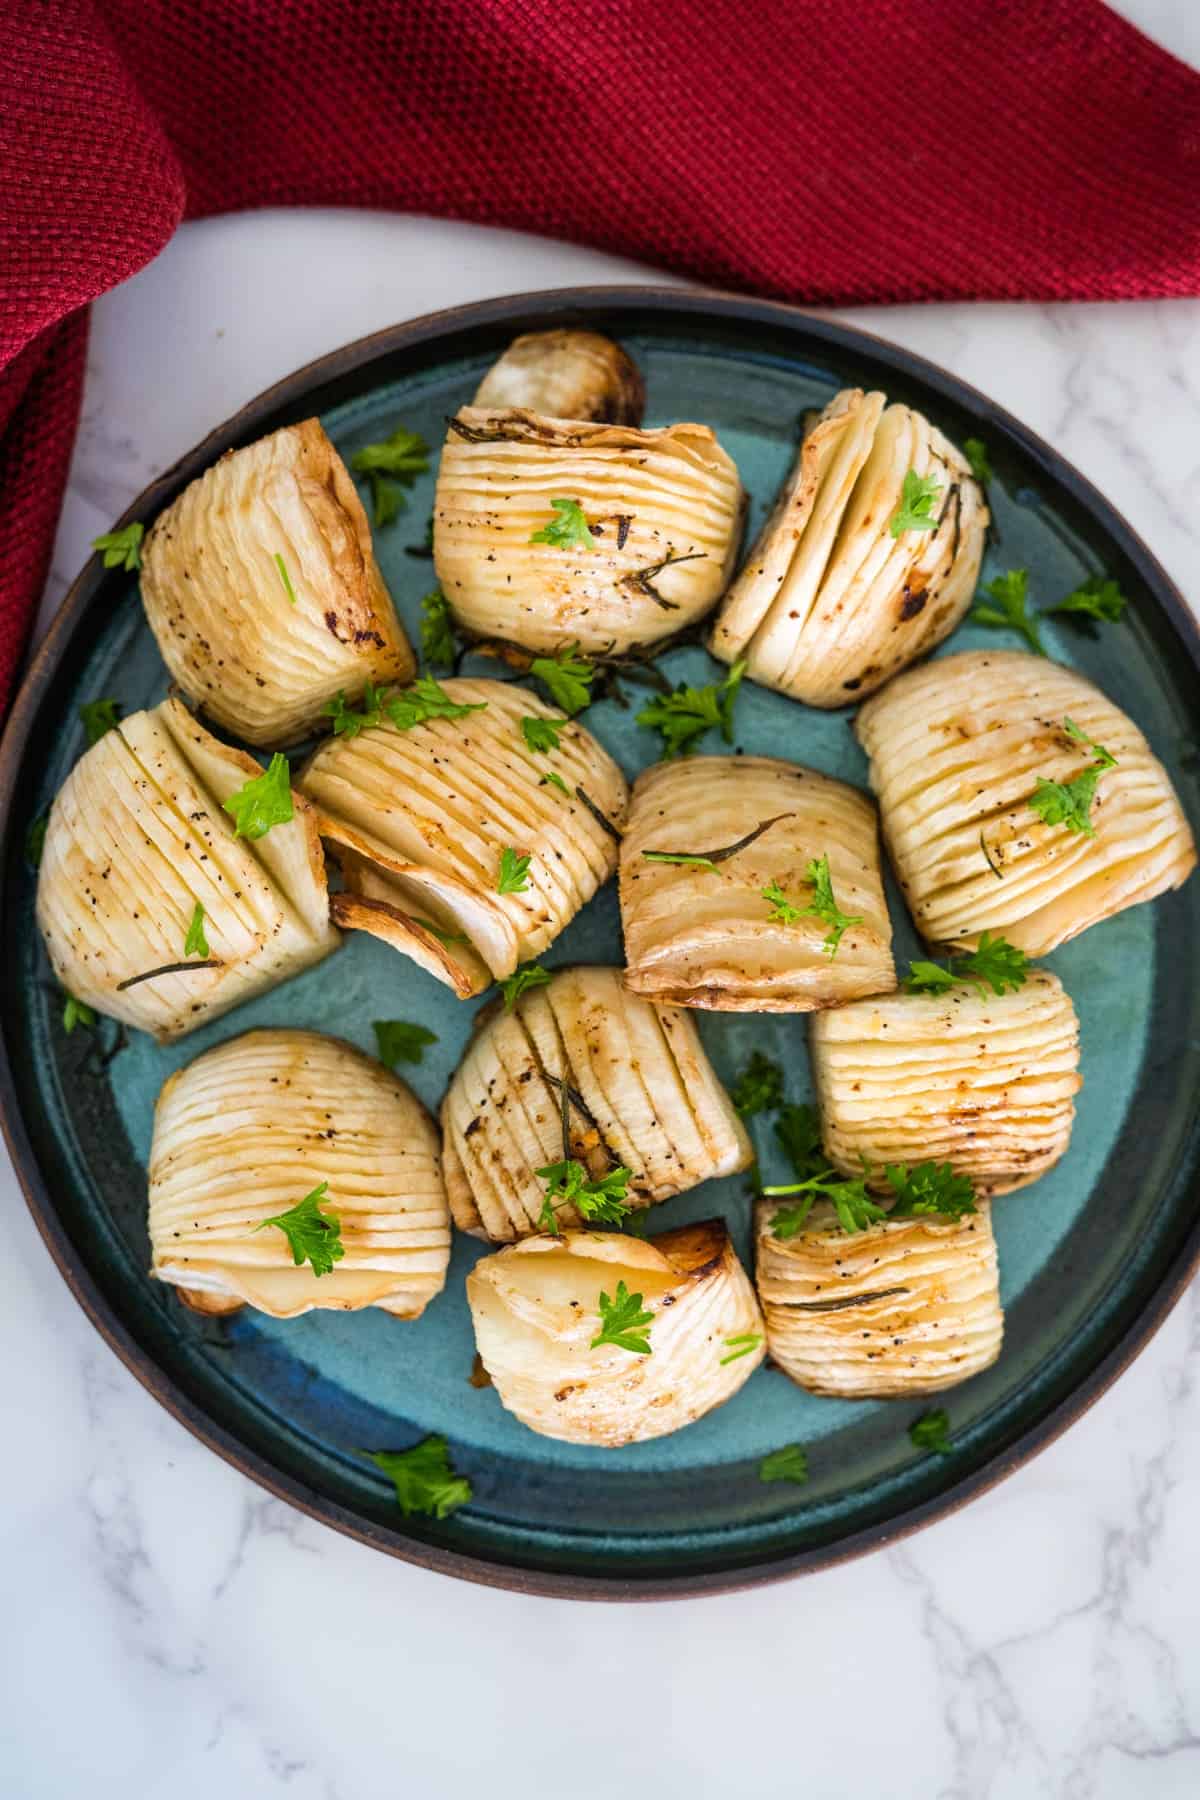 Roasted artichokes on a plate with parsley, perfect for a keto-friendly meal.